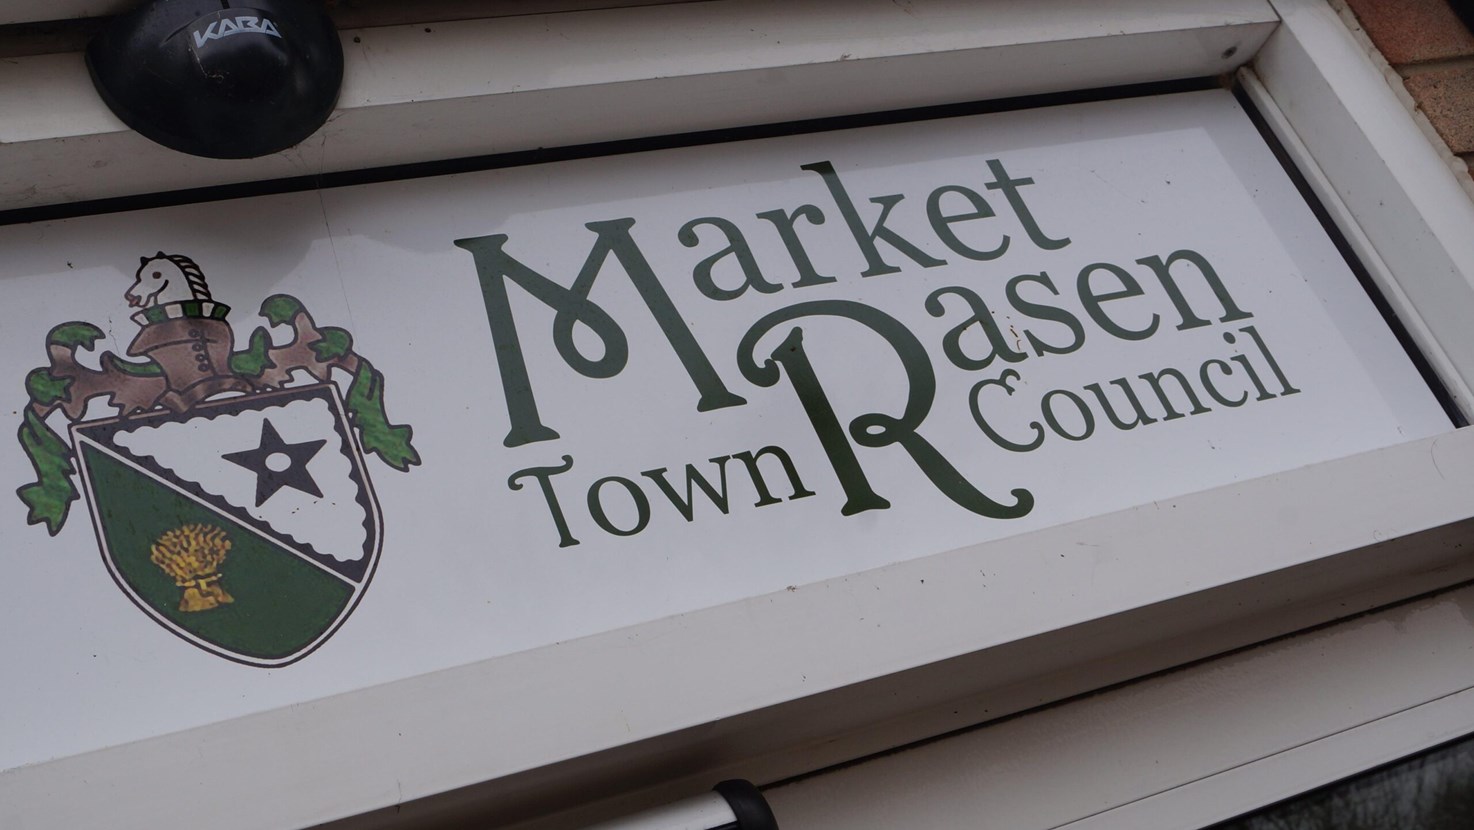 View all of the events and meetings that DPCC Phil Clark attended or hosted at Market Rasen Town Council in 2022